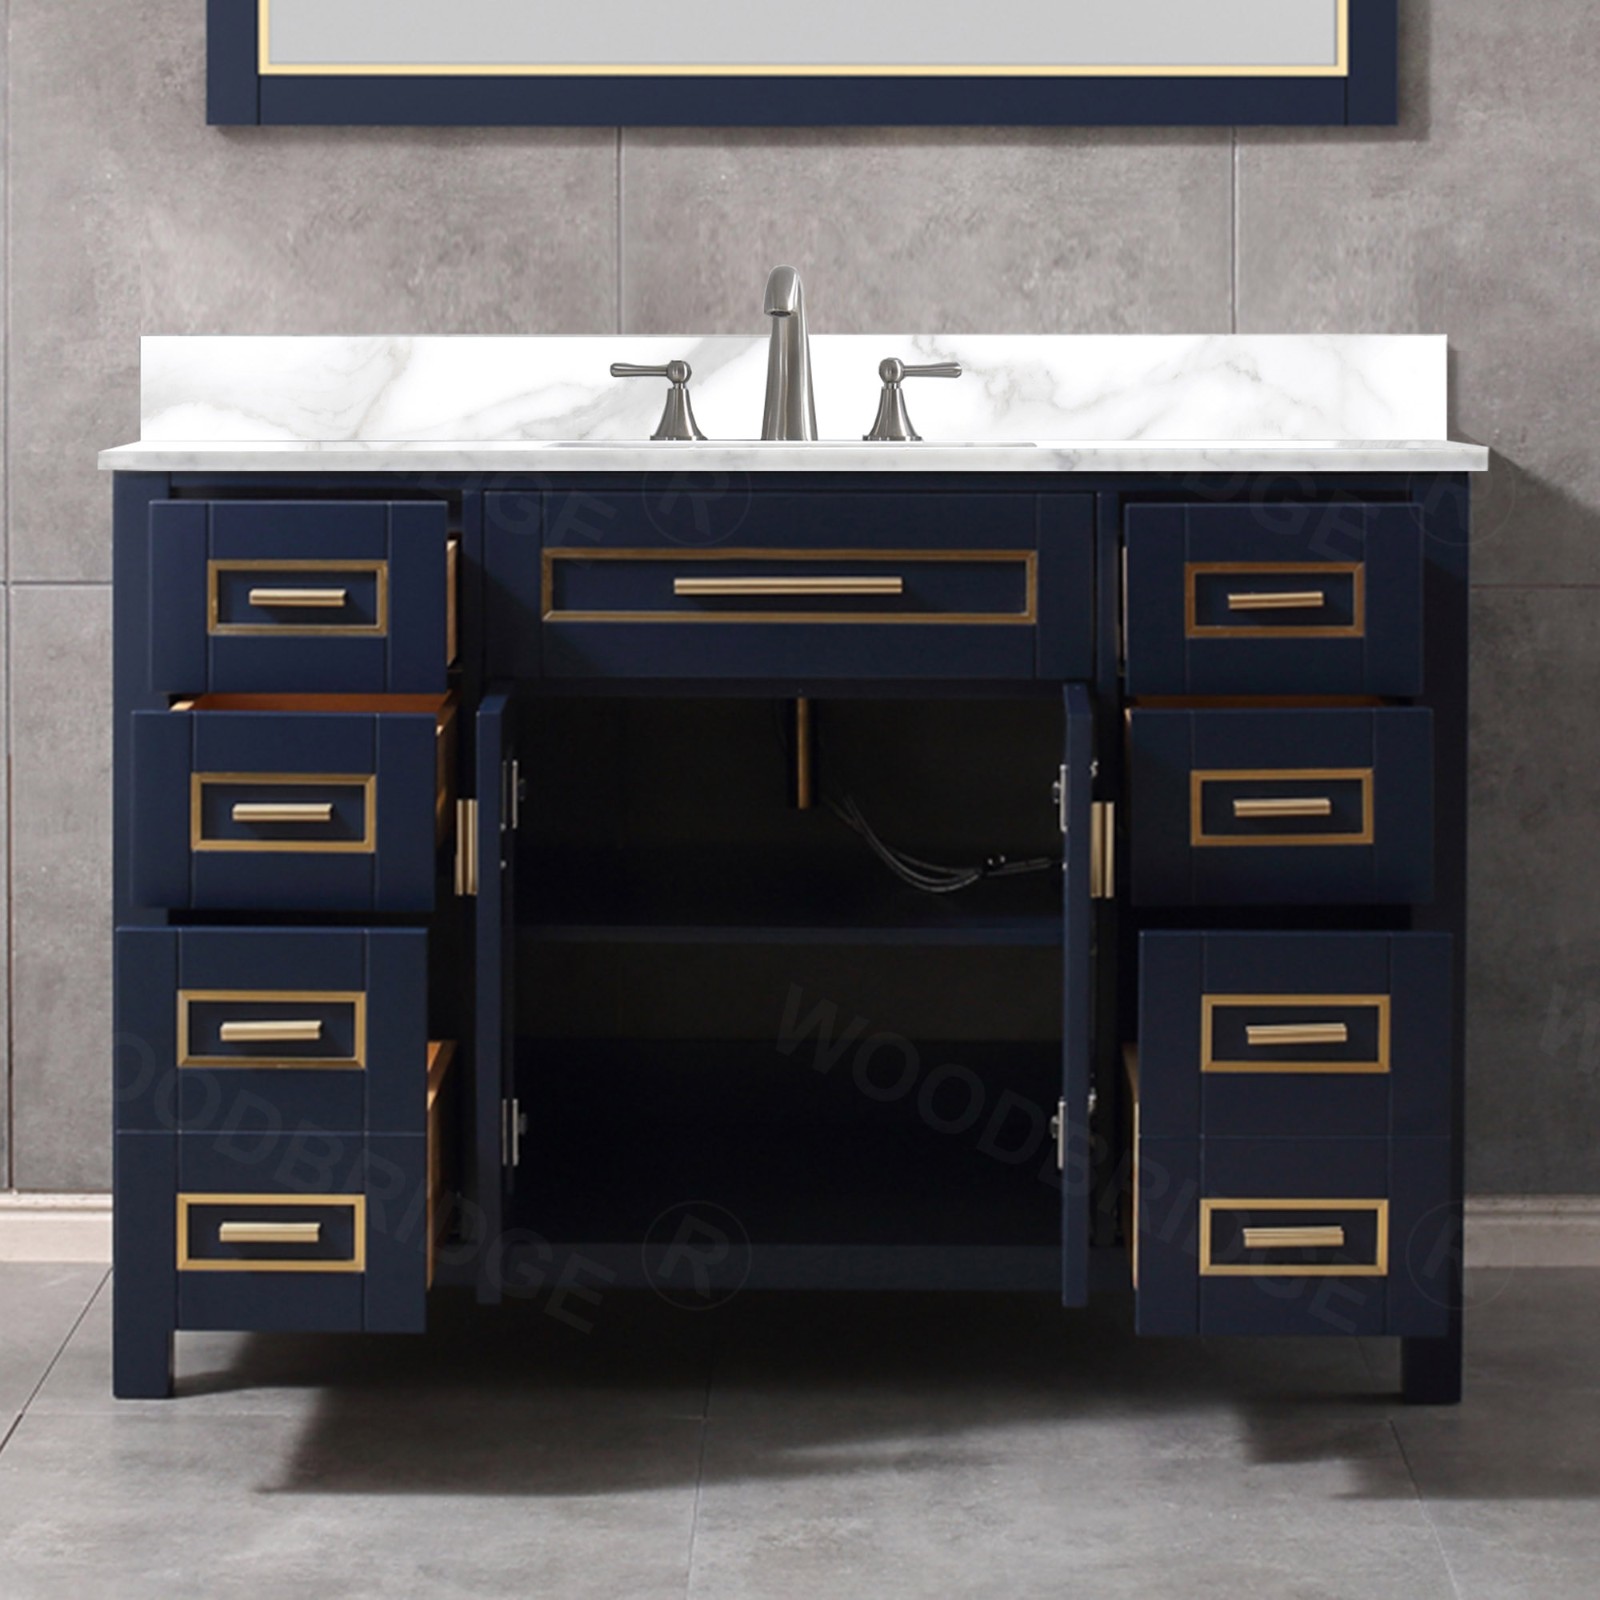  WOODBRIDGE Milan  49” Floor Mounted Single Basin Vanity Set with Solid Wood Cabinet in Navy Blue and Engineered stone composite Vanity Top in Fish Belly White with Pre-installed Undermount Rectangle Bathroom Sink and Pre-Drilled 3-Hole for 8” Widespread F_4716